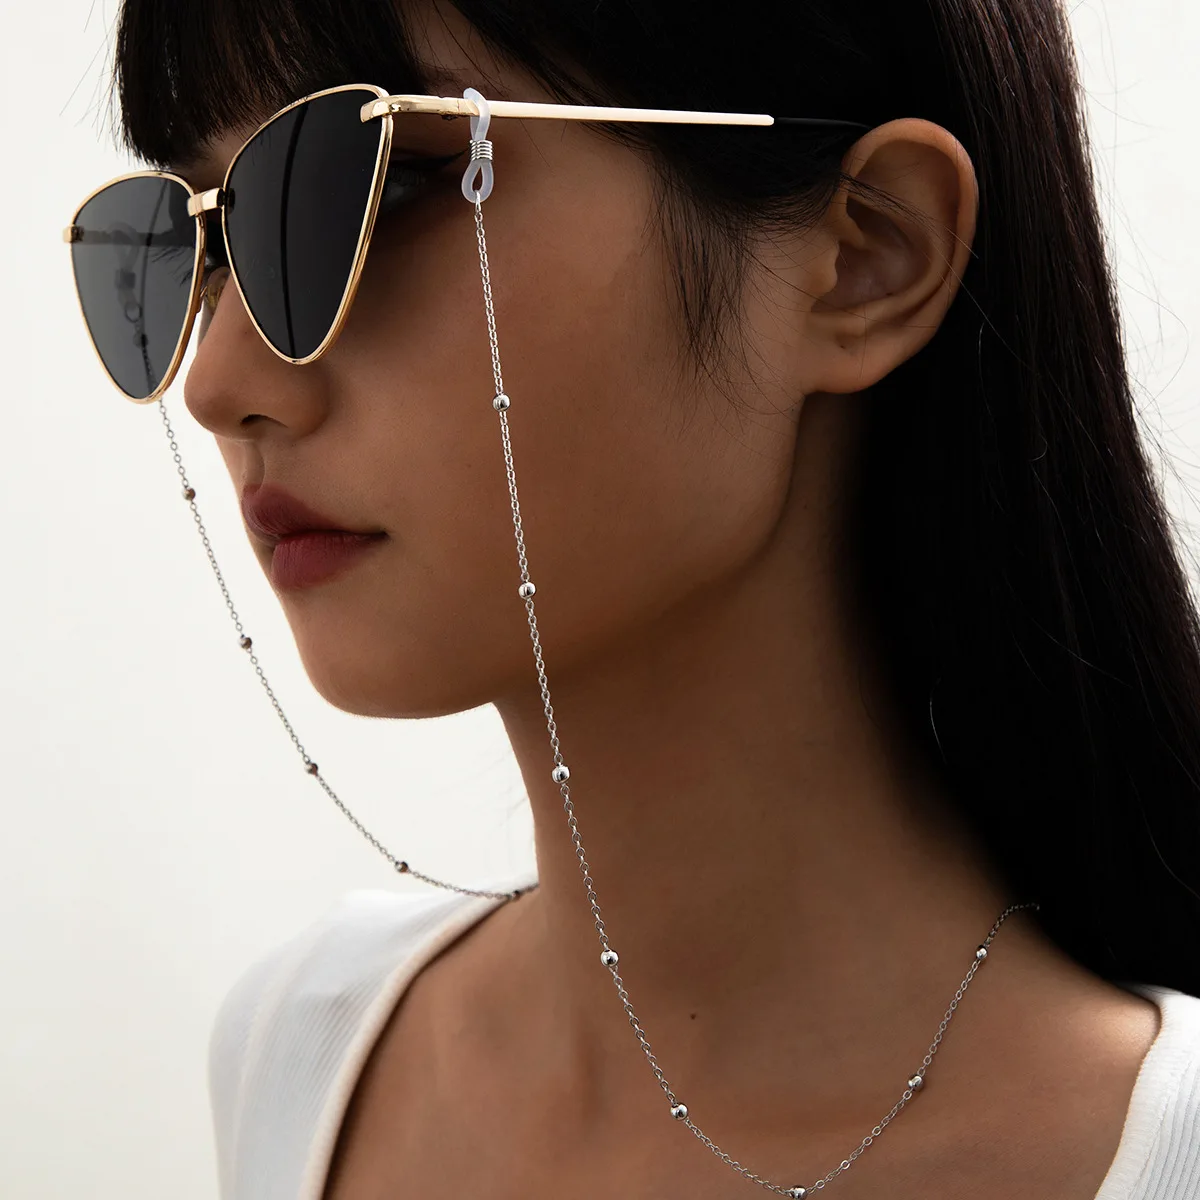 Fashion Woman Sunglasses Chain Cylinder Bead Chain Anti-Falling Glasses Eyeglasses Cord Necklace Mask Chain 2022 Trend New